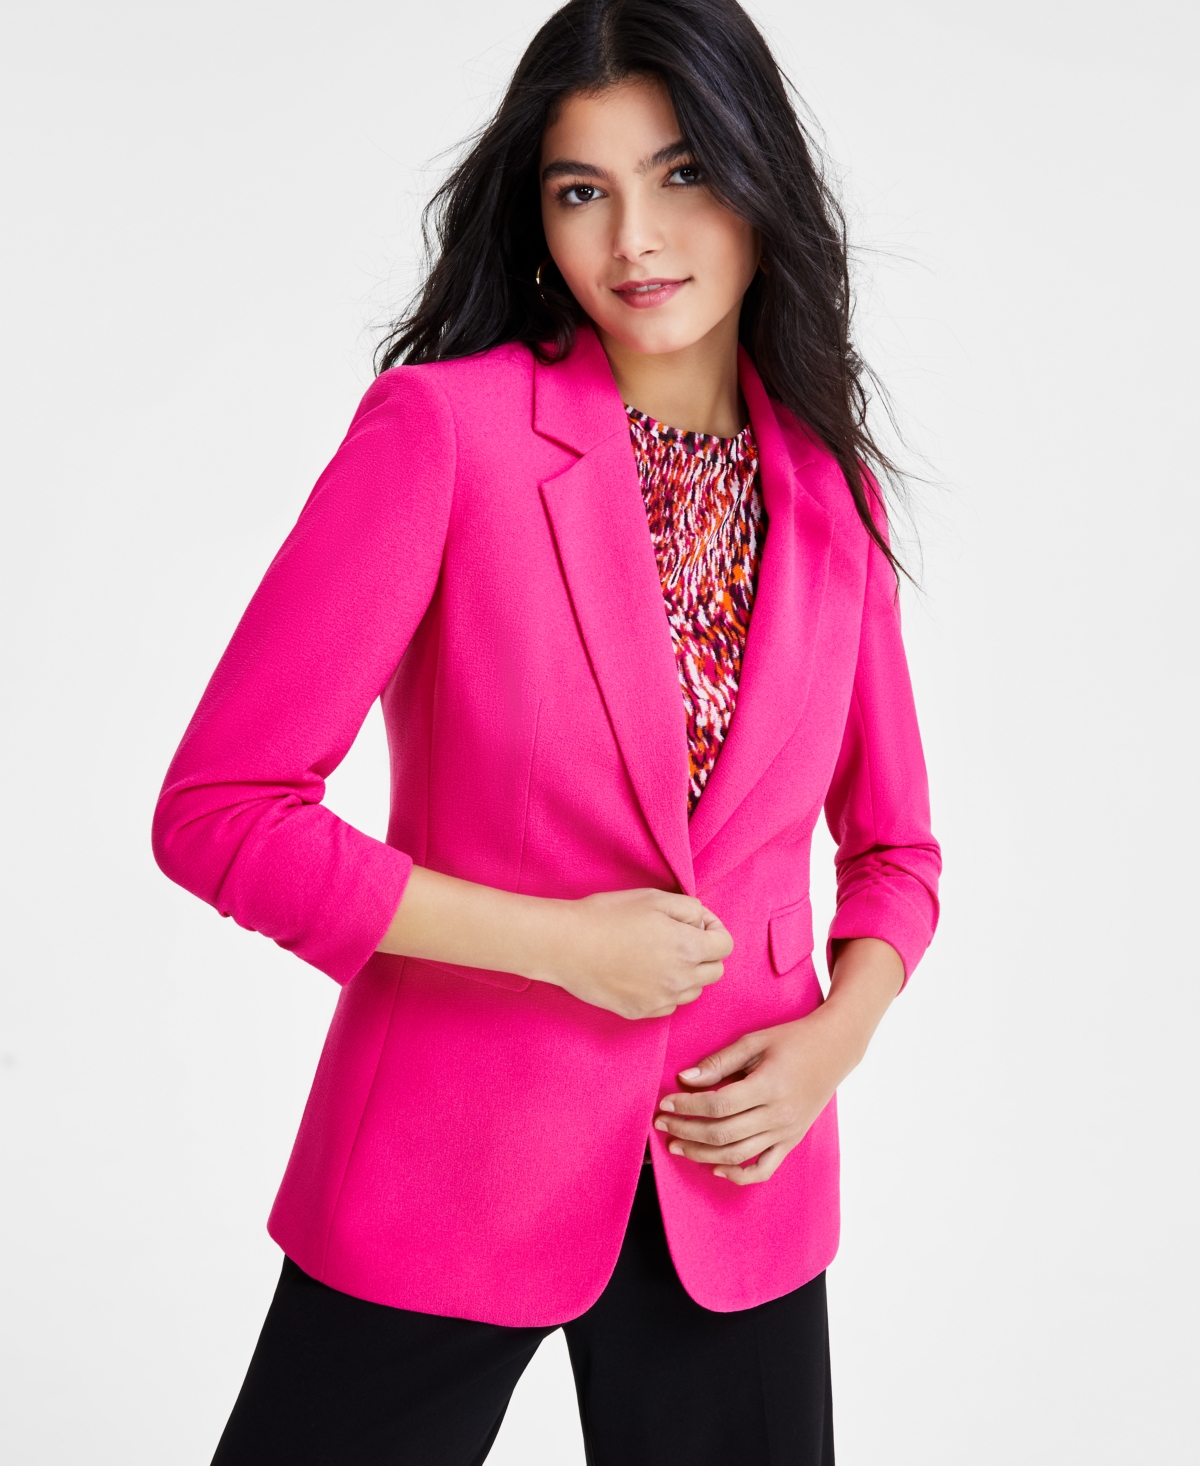 Women's Ruched 3/4-Sleeve One-Button Blazer, Created for Macy's - Black